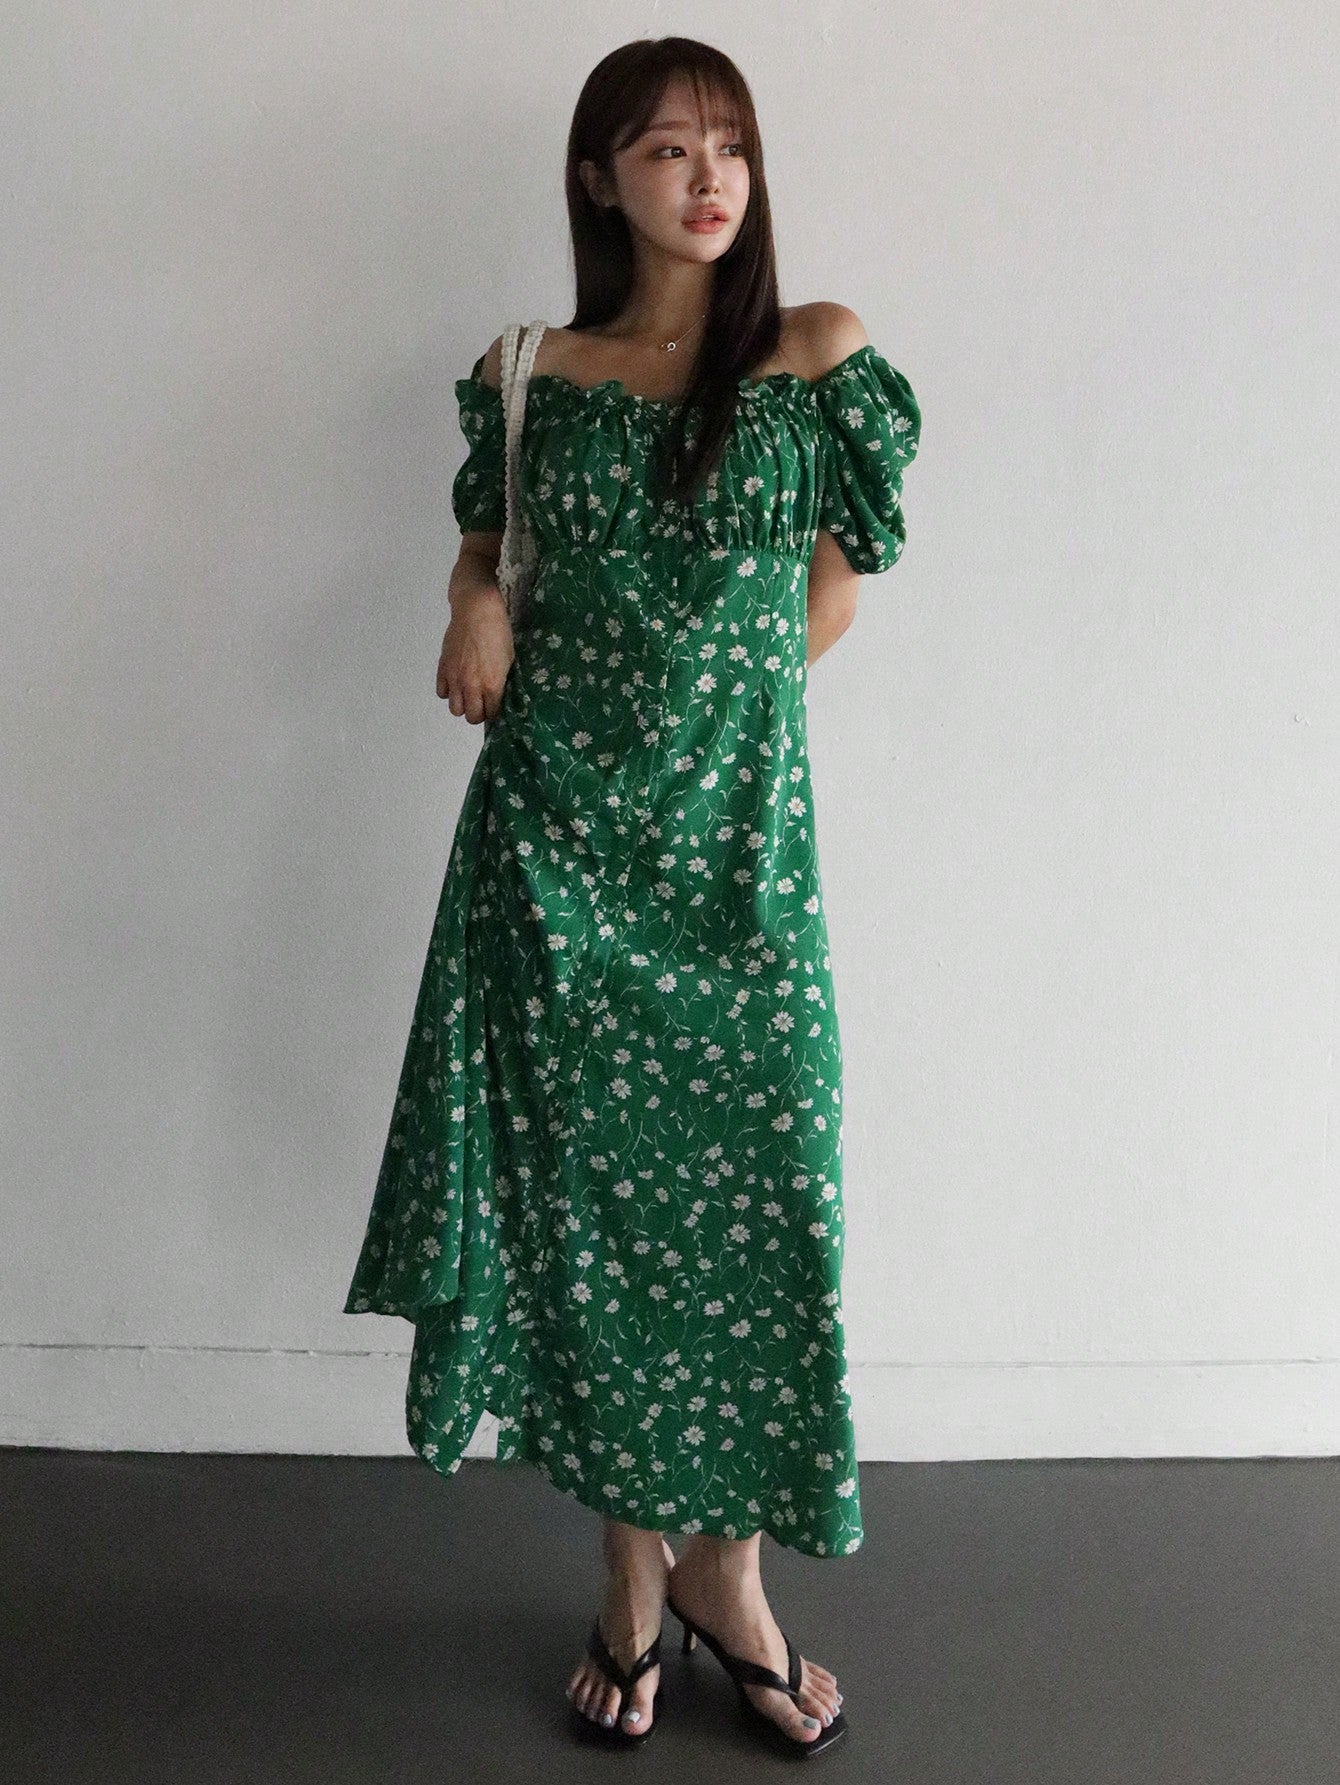 Women Floral Print Vacation Casual Long Bubble Sleeve Dress